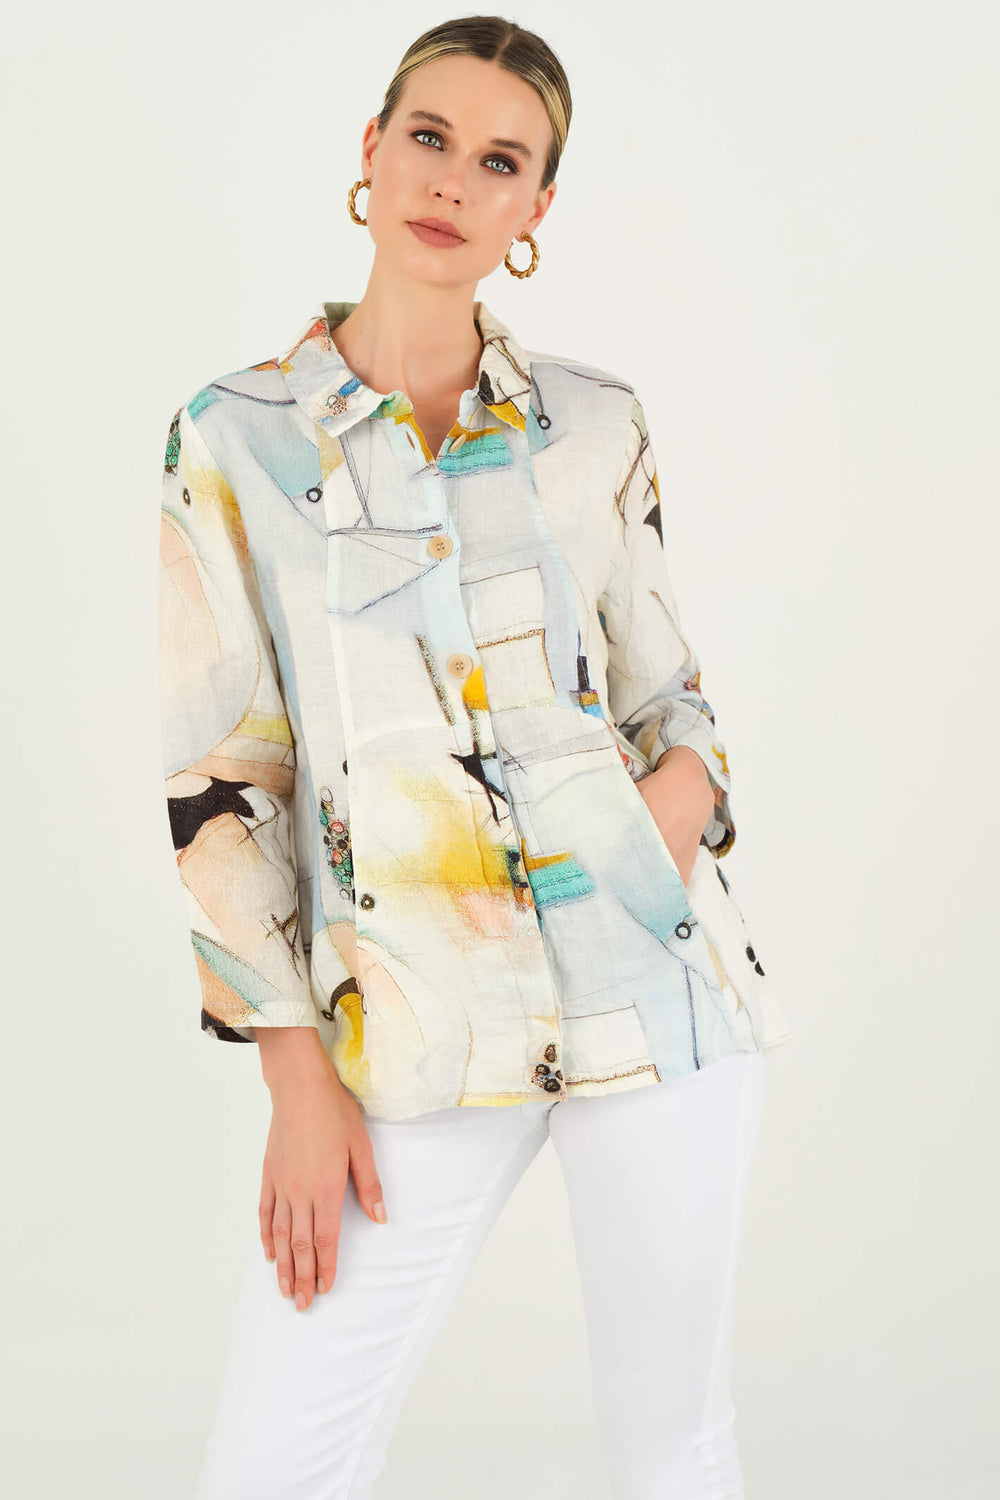 Dolcezza 23660 Shirt - Experience Boutique